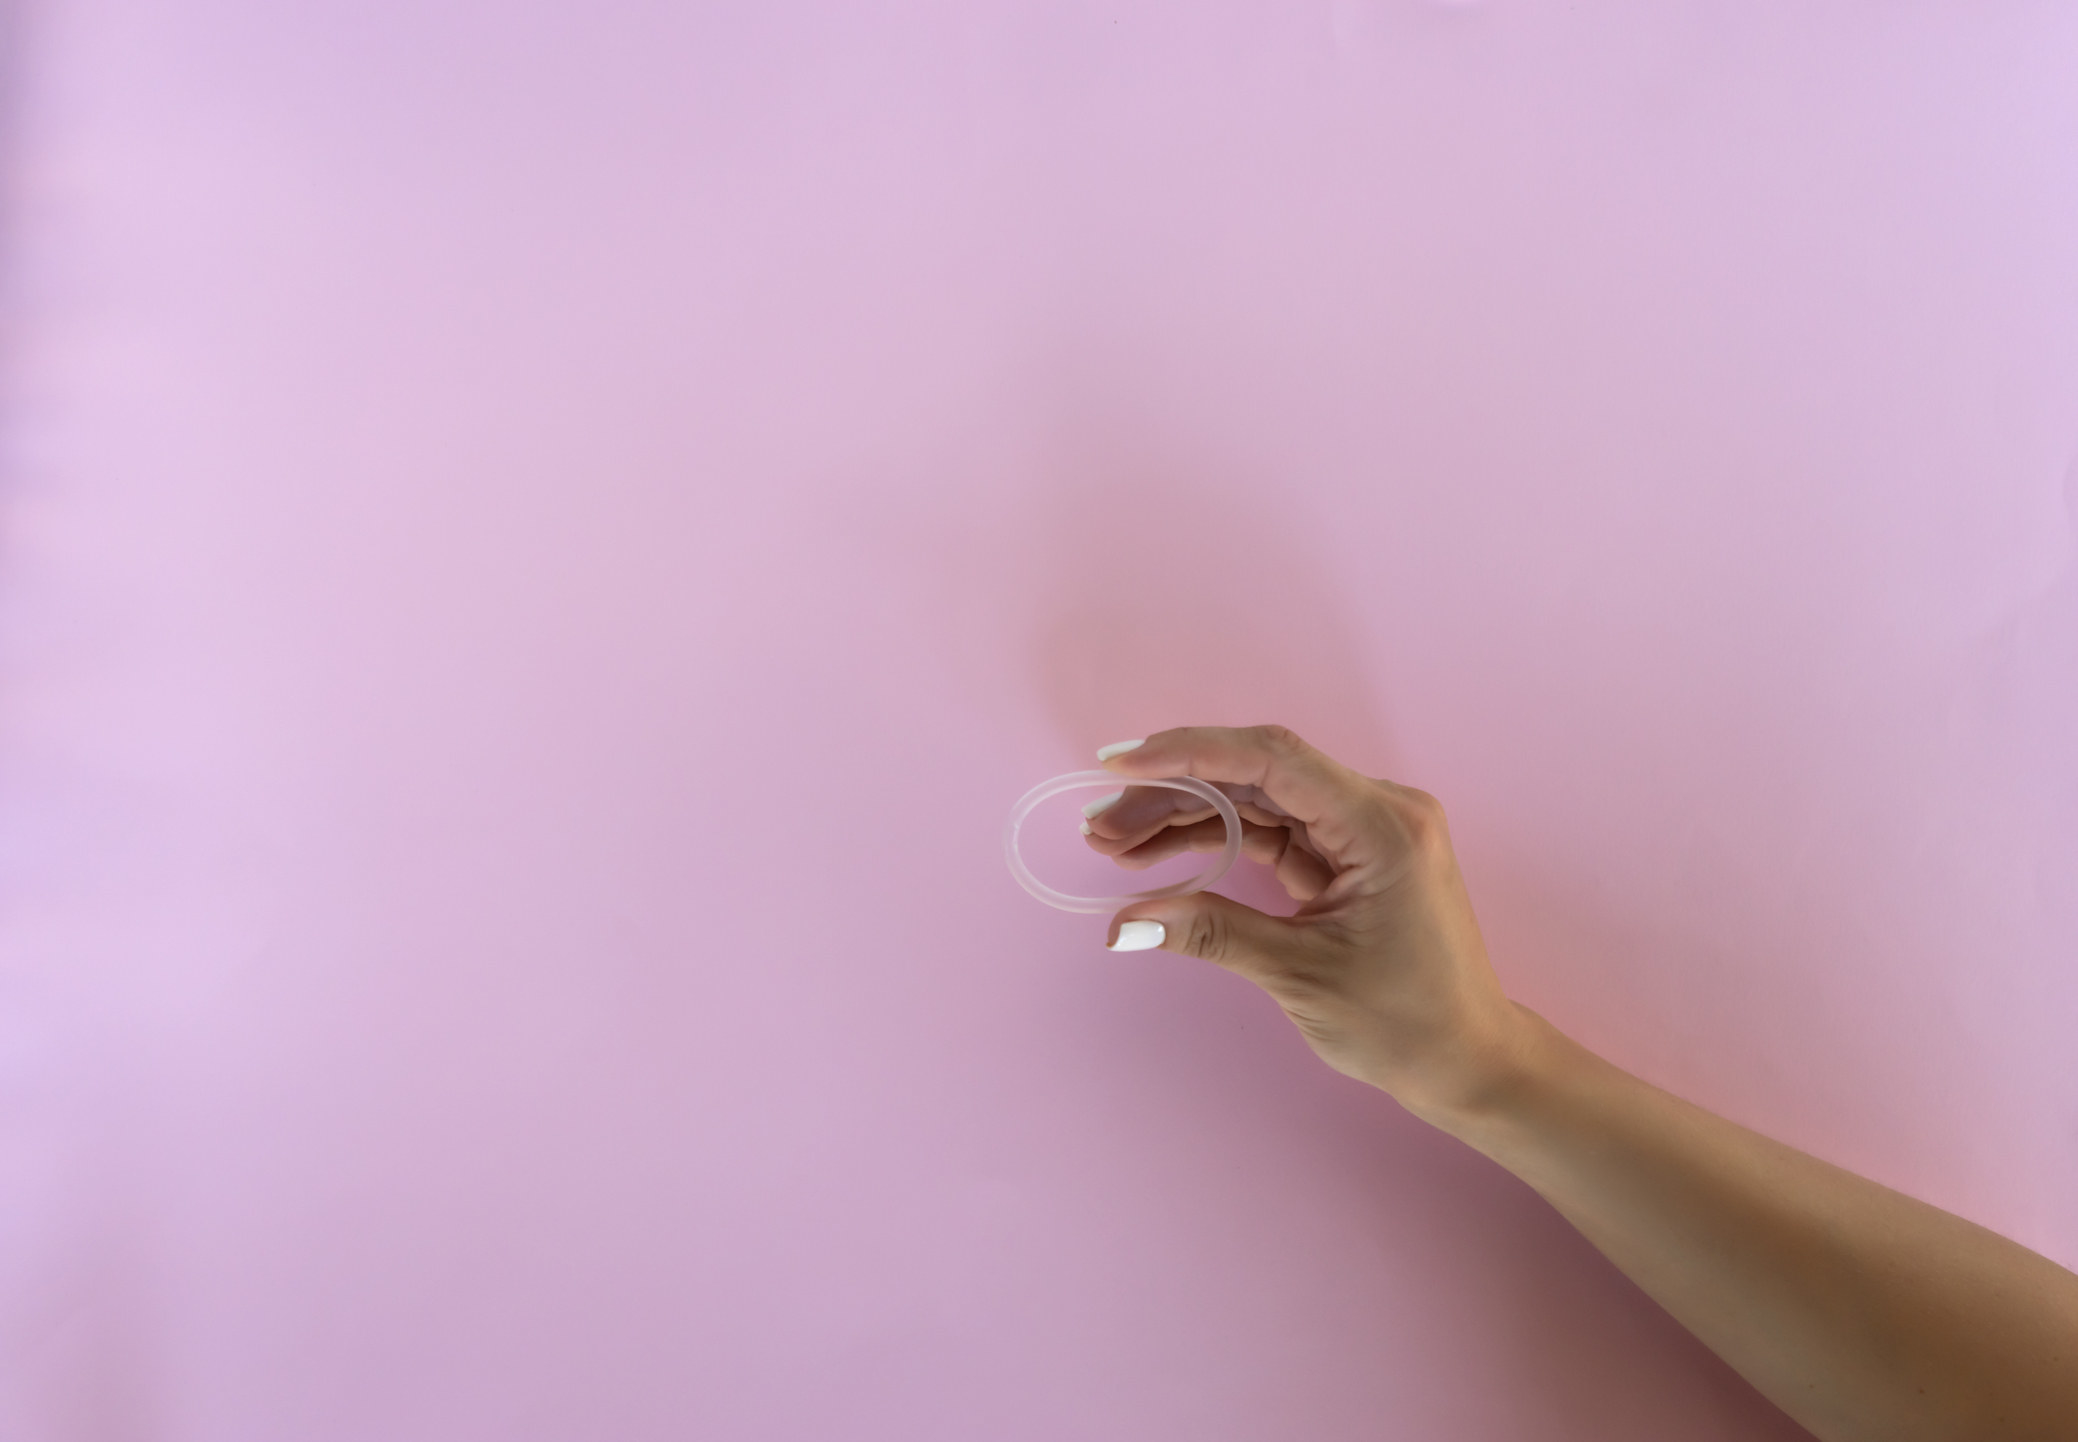 A stock image of someone holding up a birth control ring in front of a pink background